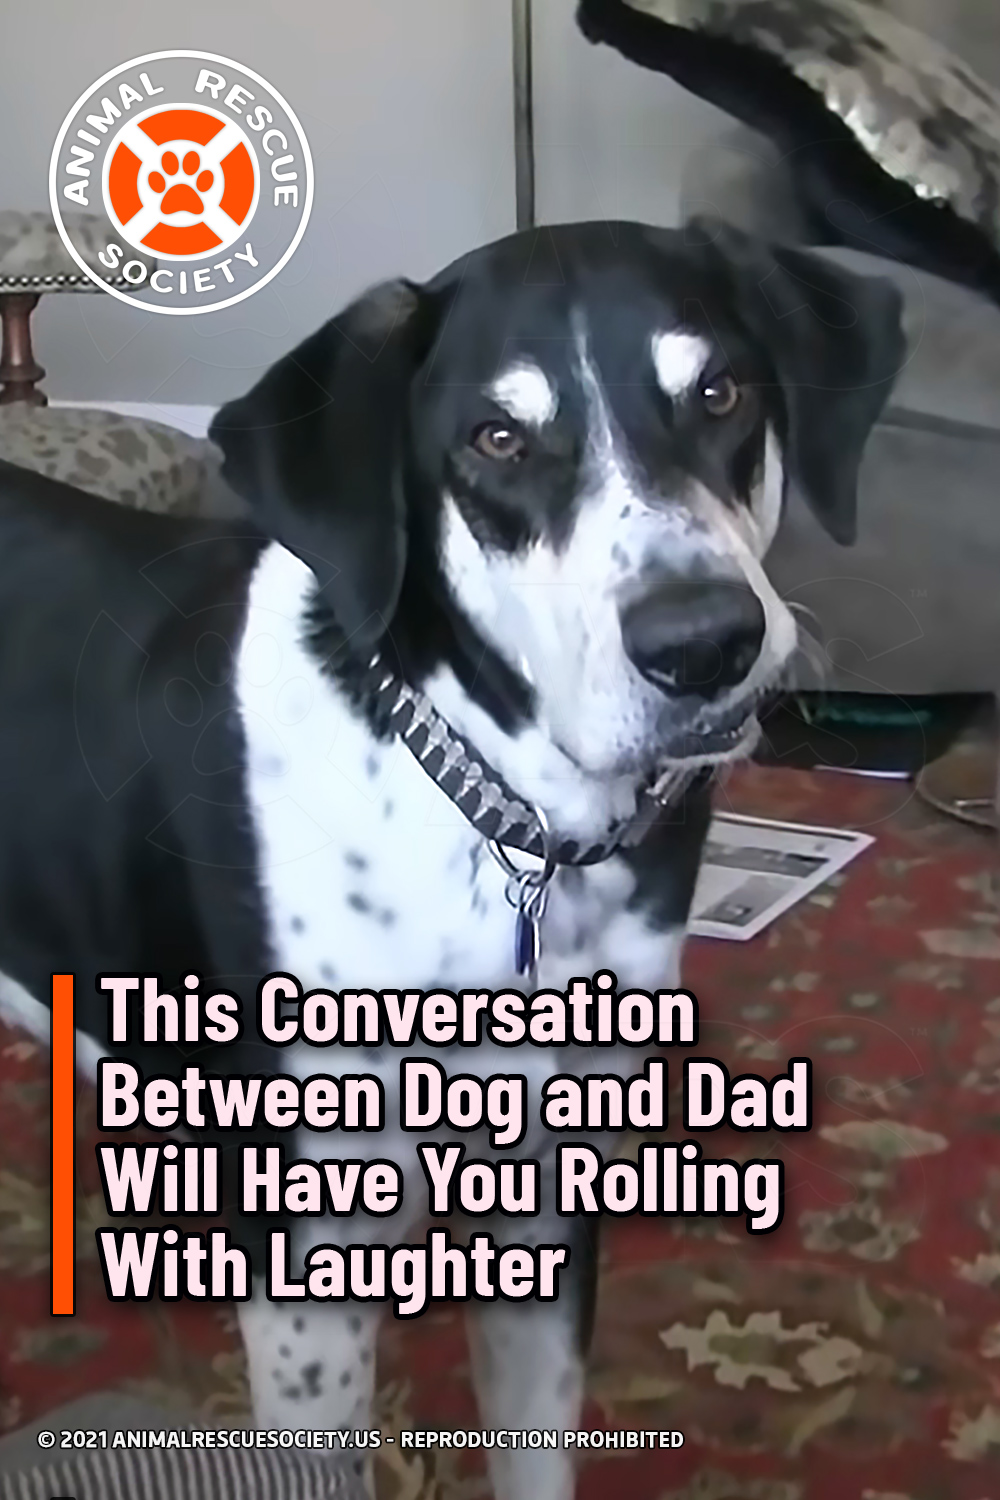 This Conversation Between Dog and Dad Will Have You Rolling With Laughter